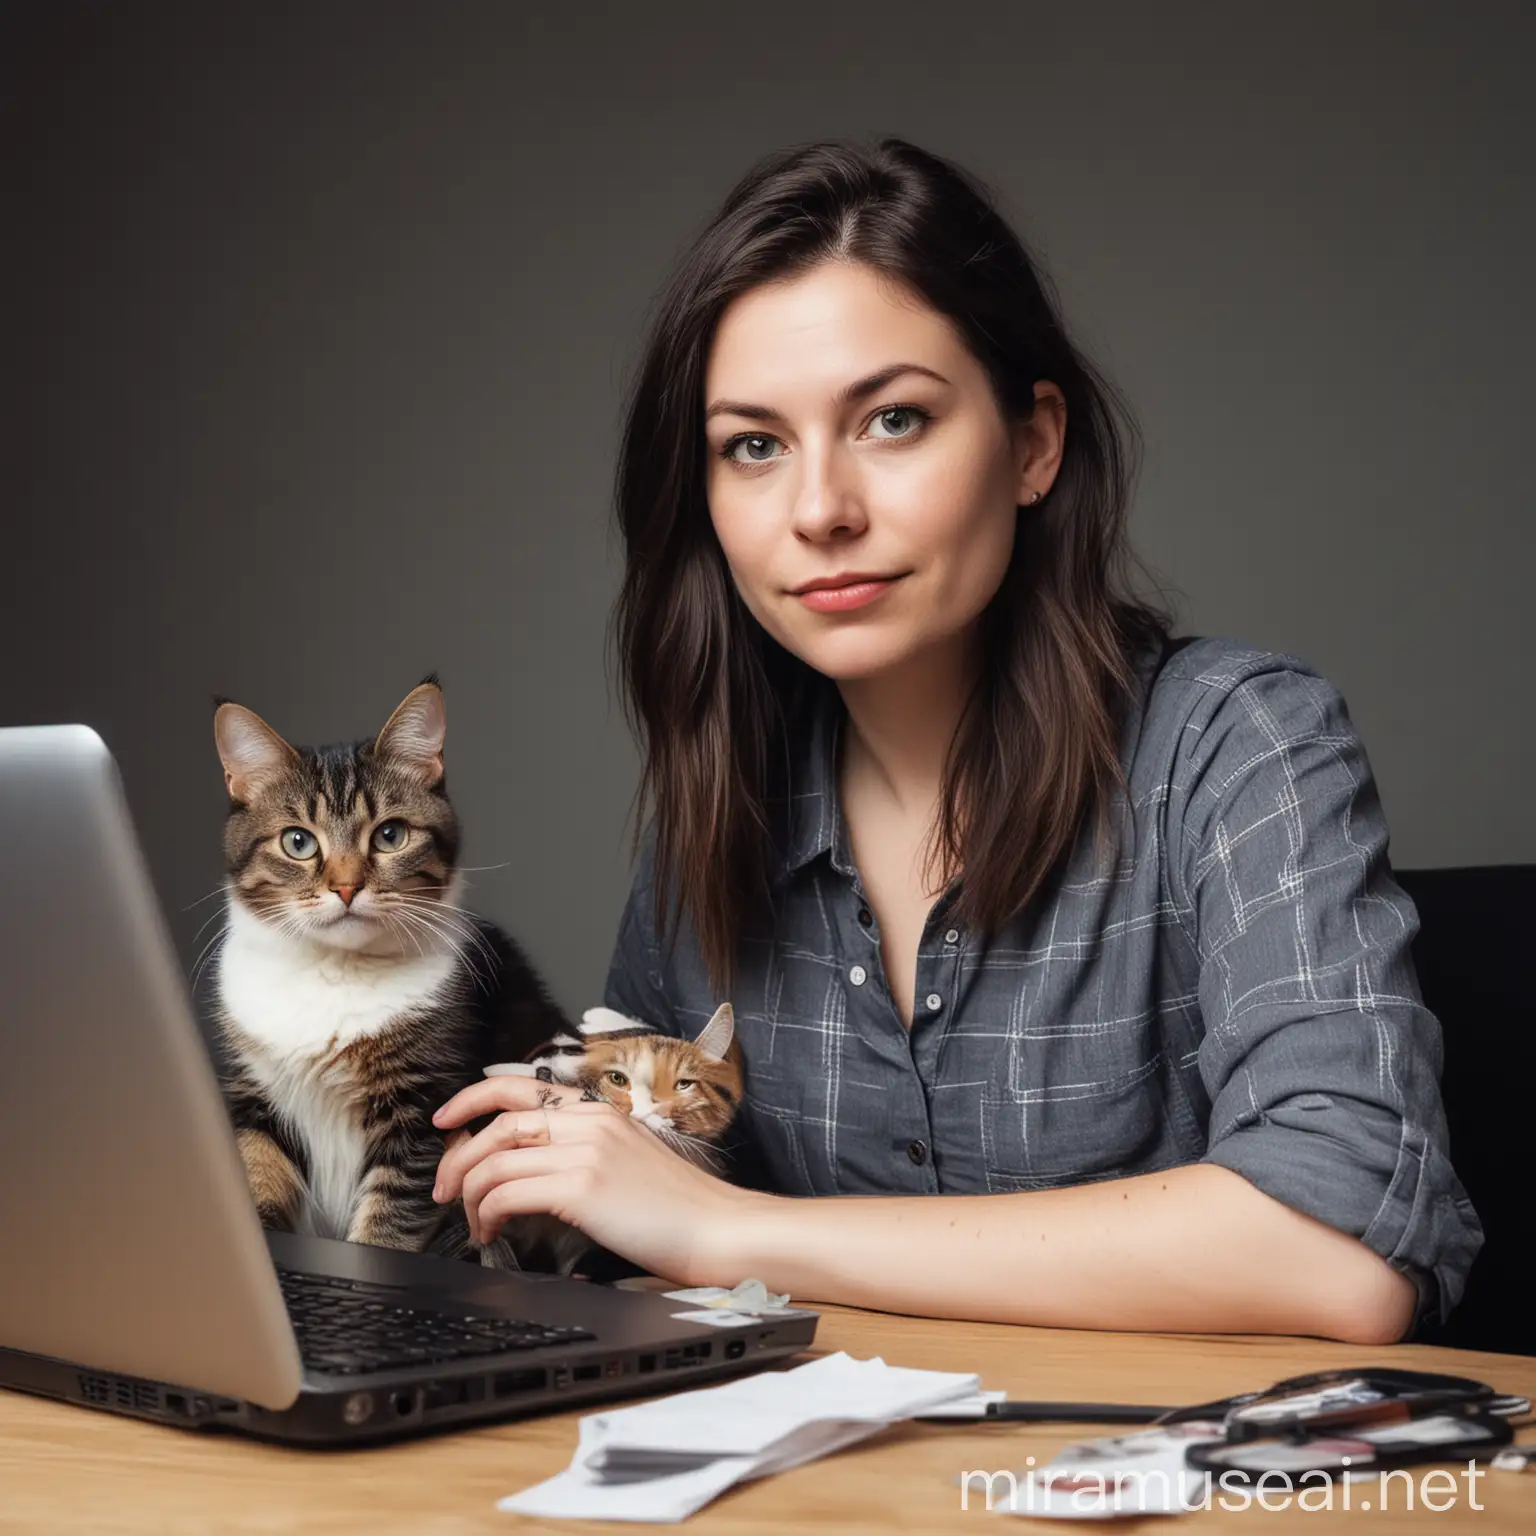 portrait of a 29 year old woman, has  a cat, graphic designer, creative, introverted, and productive